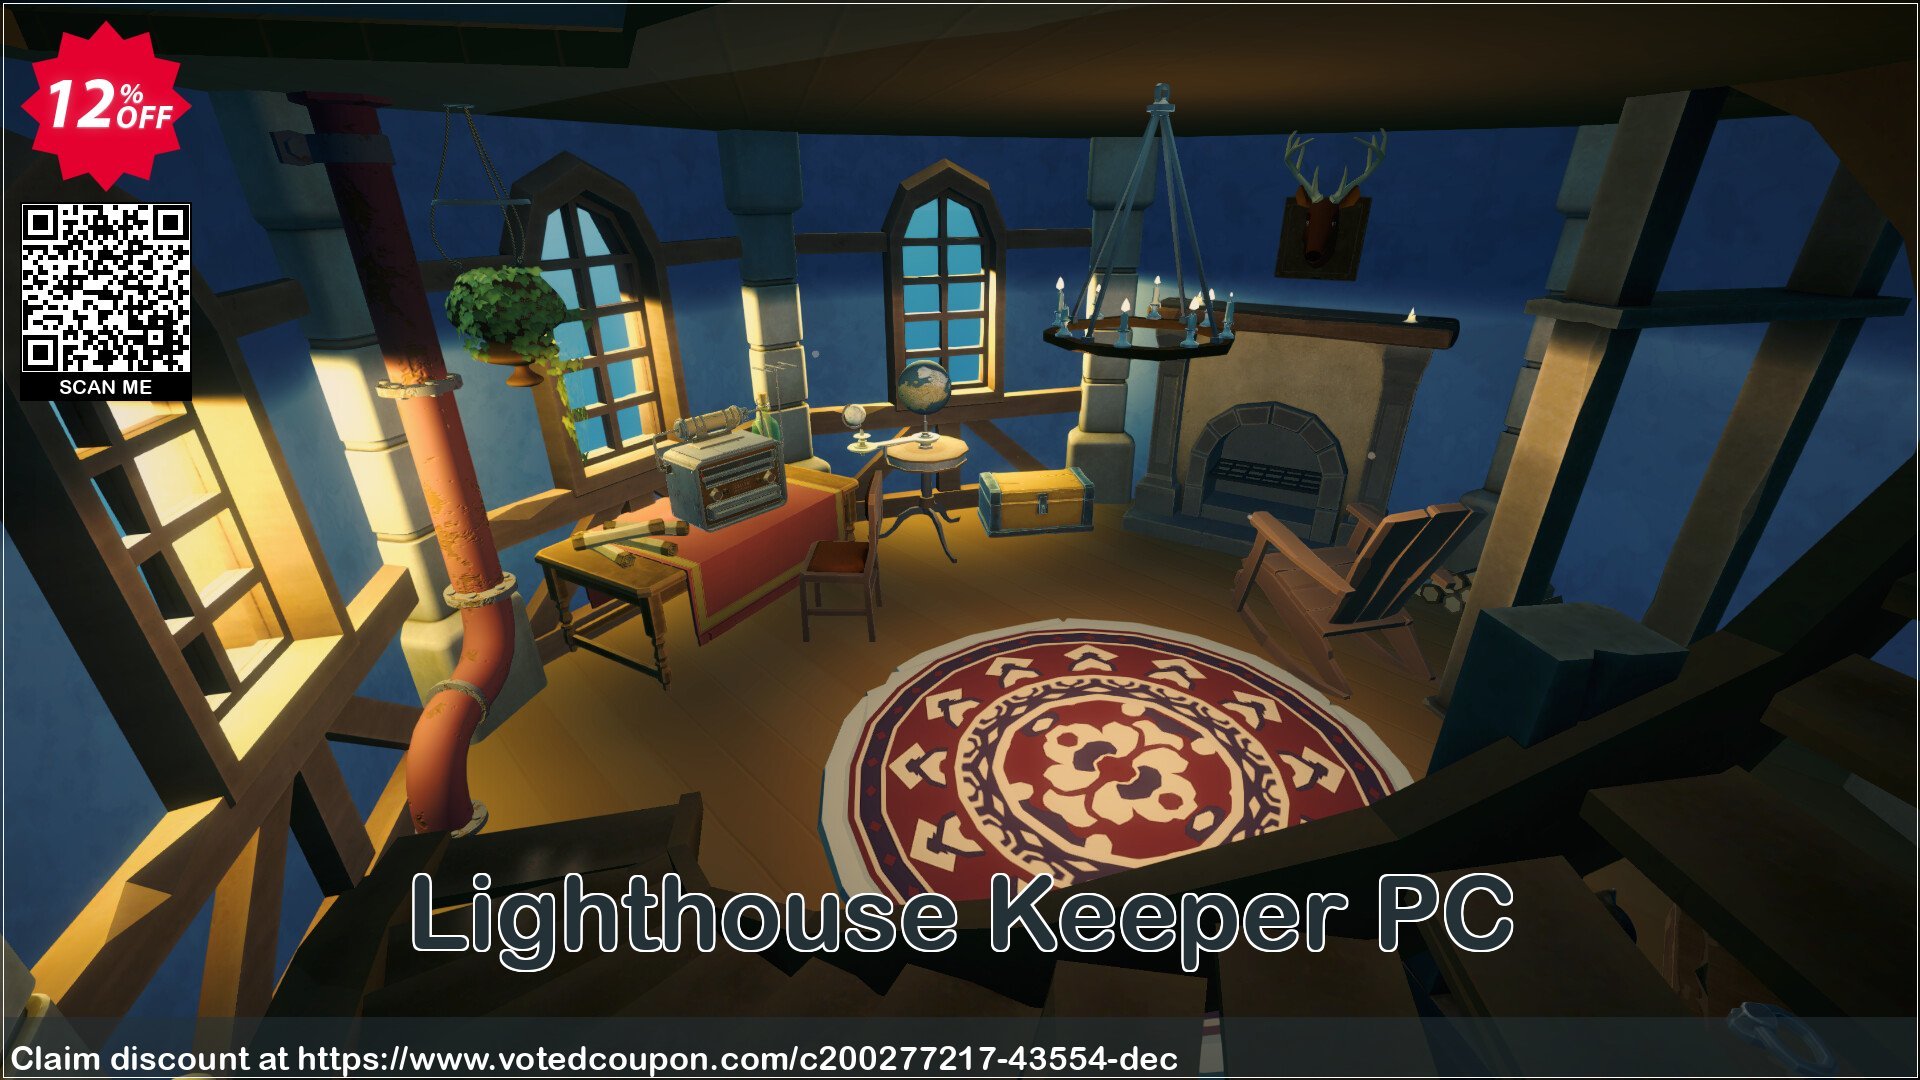 Lighthouse Keeper PC Coupon Code May 2024, 12% OFF - VotedCoupon